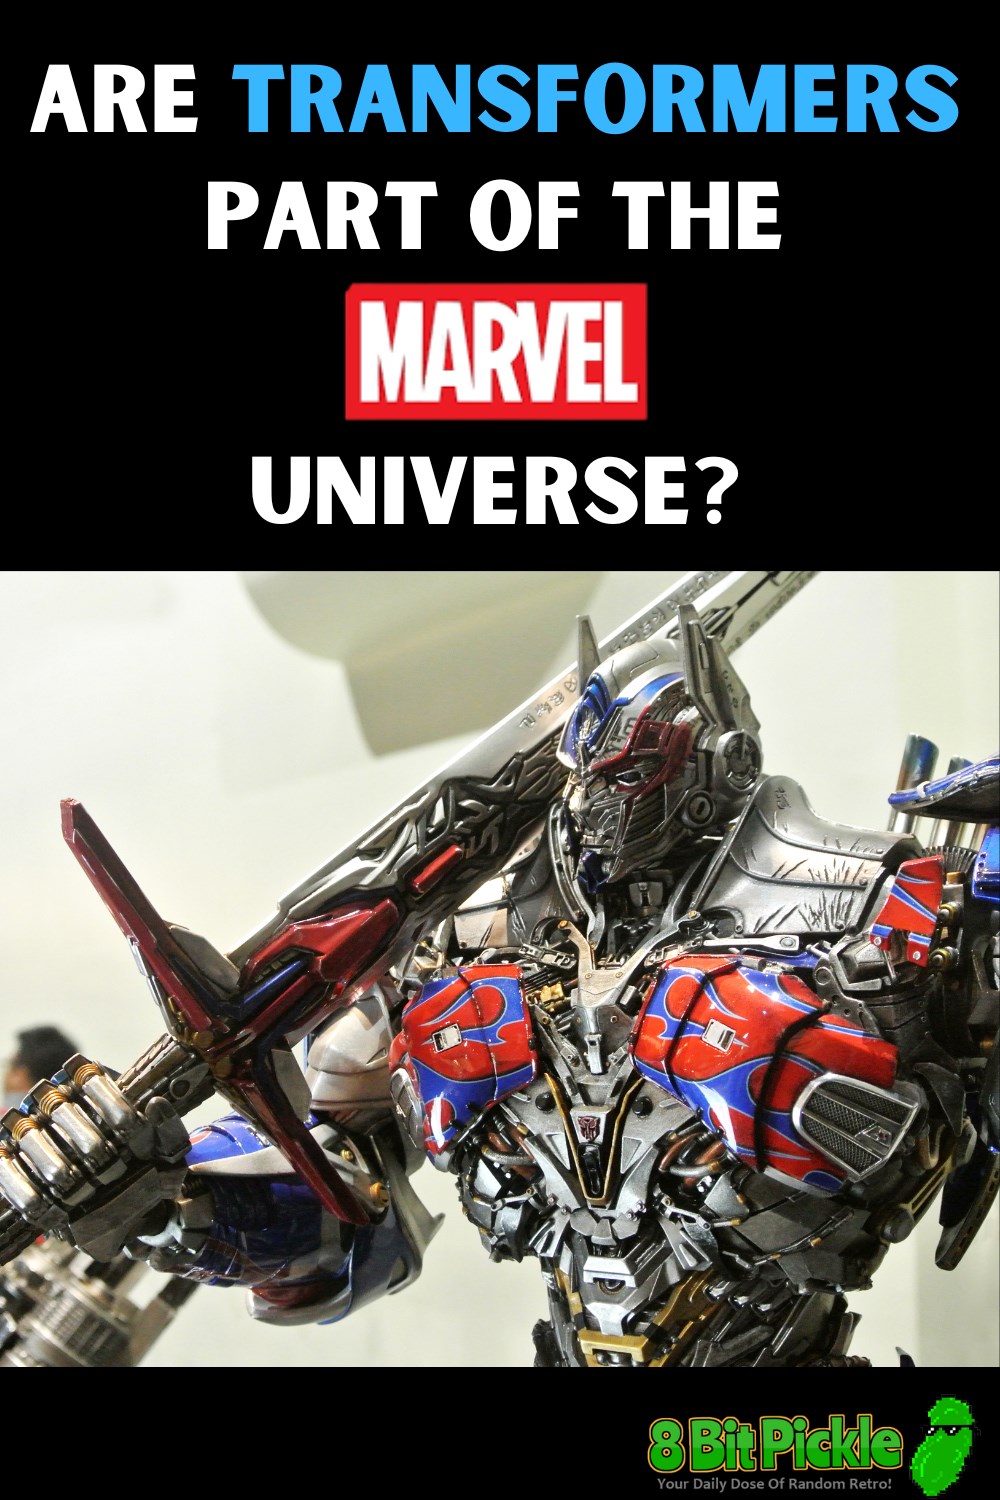 Transformers are not part of the Marvel Universe